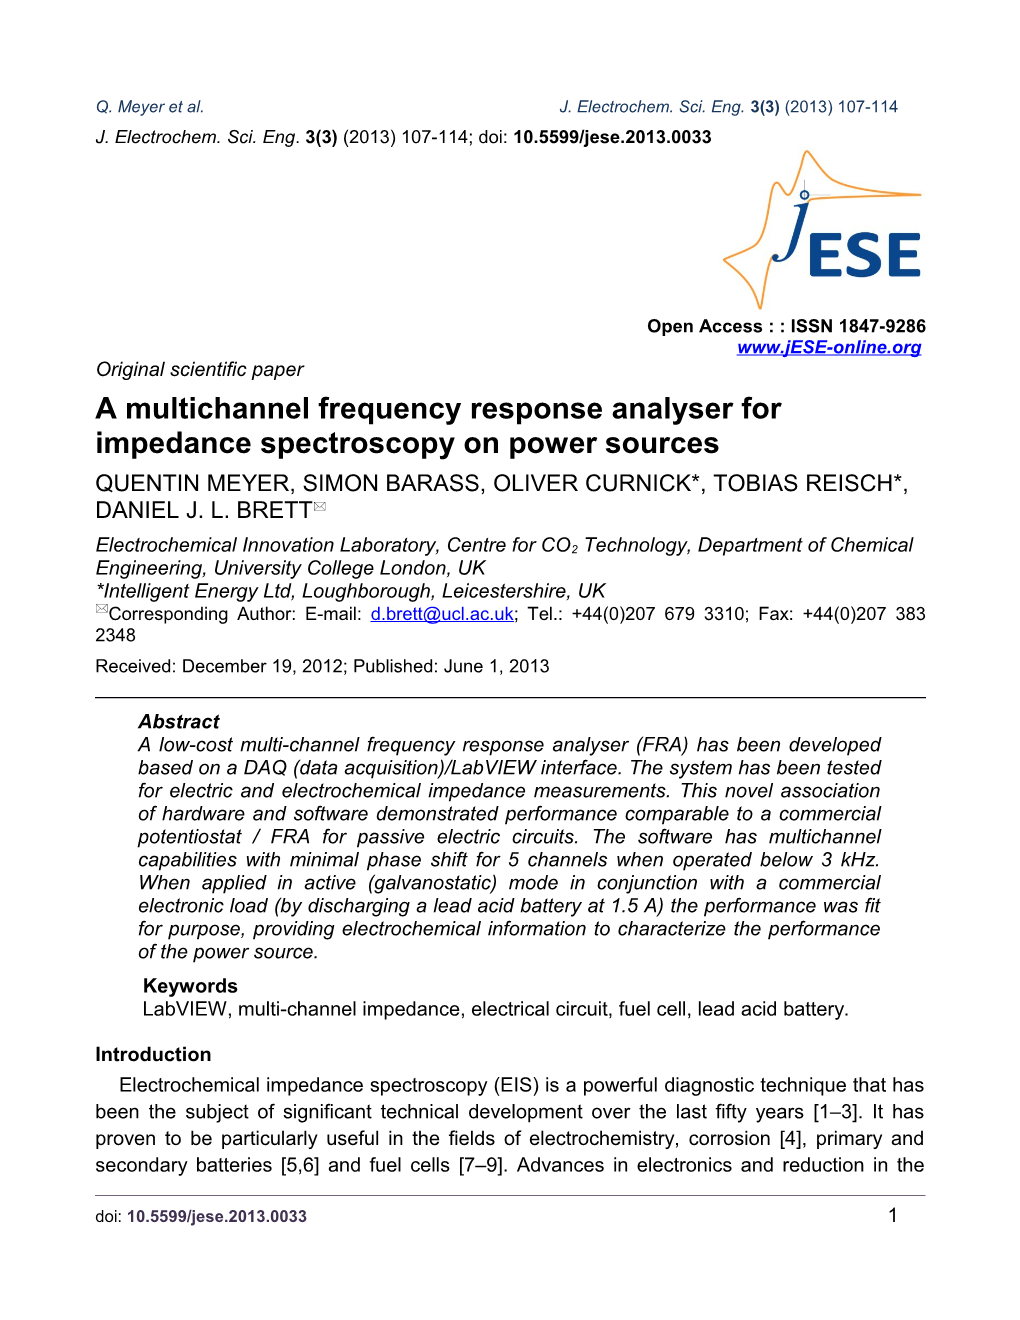 A Multichannel Frequency Response Analyser for Impedance Spectroscopy on Power Sources